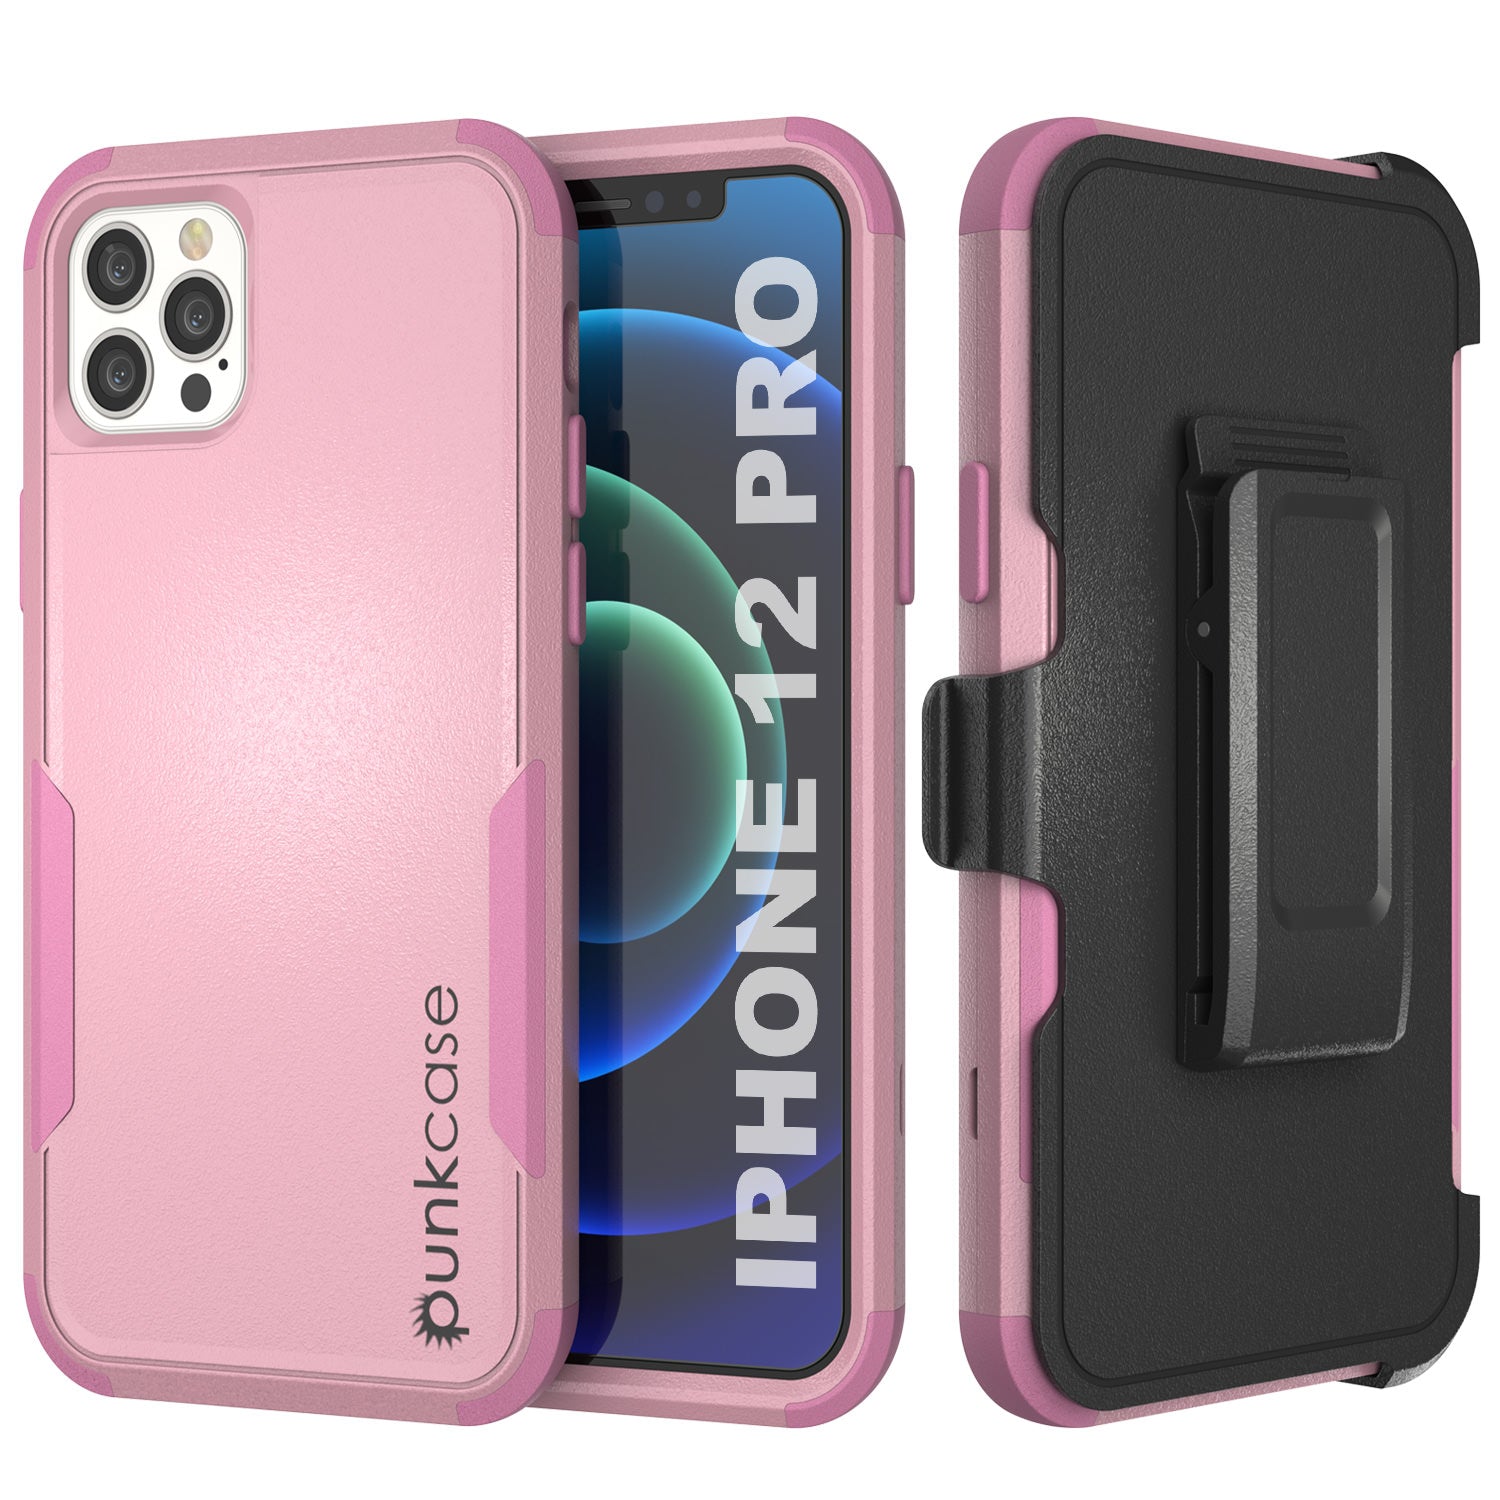 Case Iphone12 Pro Max Cover, Iphone12 Mobile Phone Shell